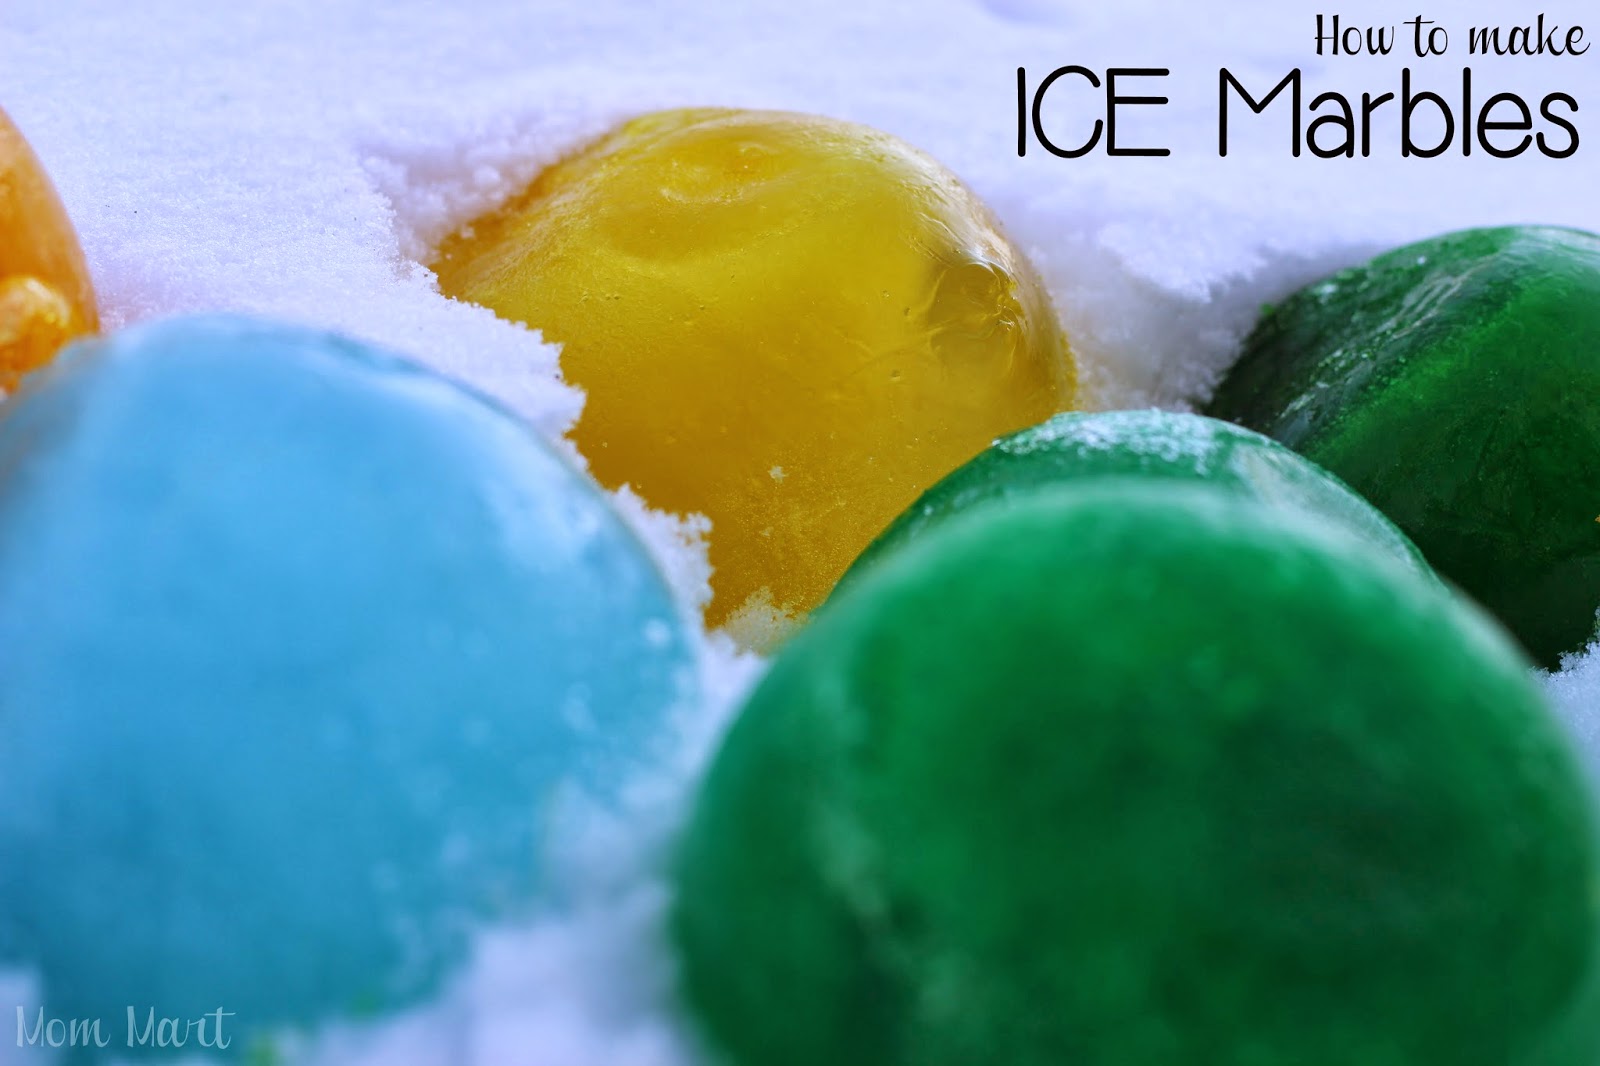 How to make ICE Marbles: A hands on Activity for children #CraftsForKids #KidCraft #Activity tutorial with game and science experiment.